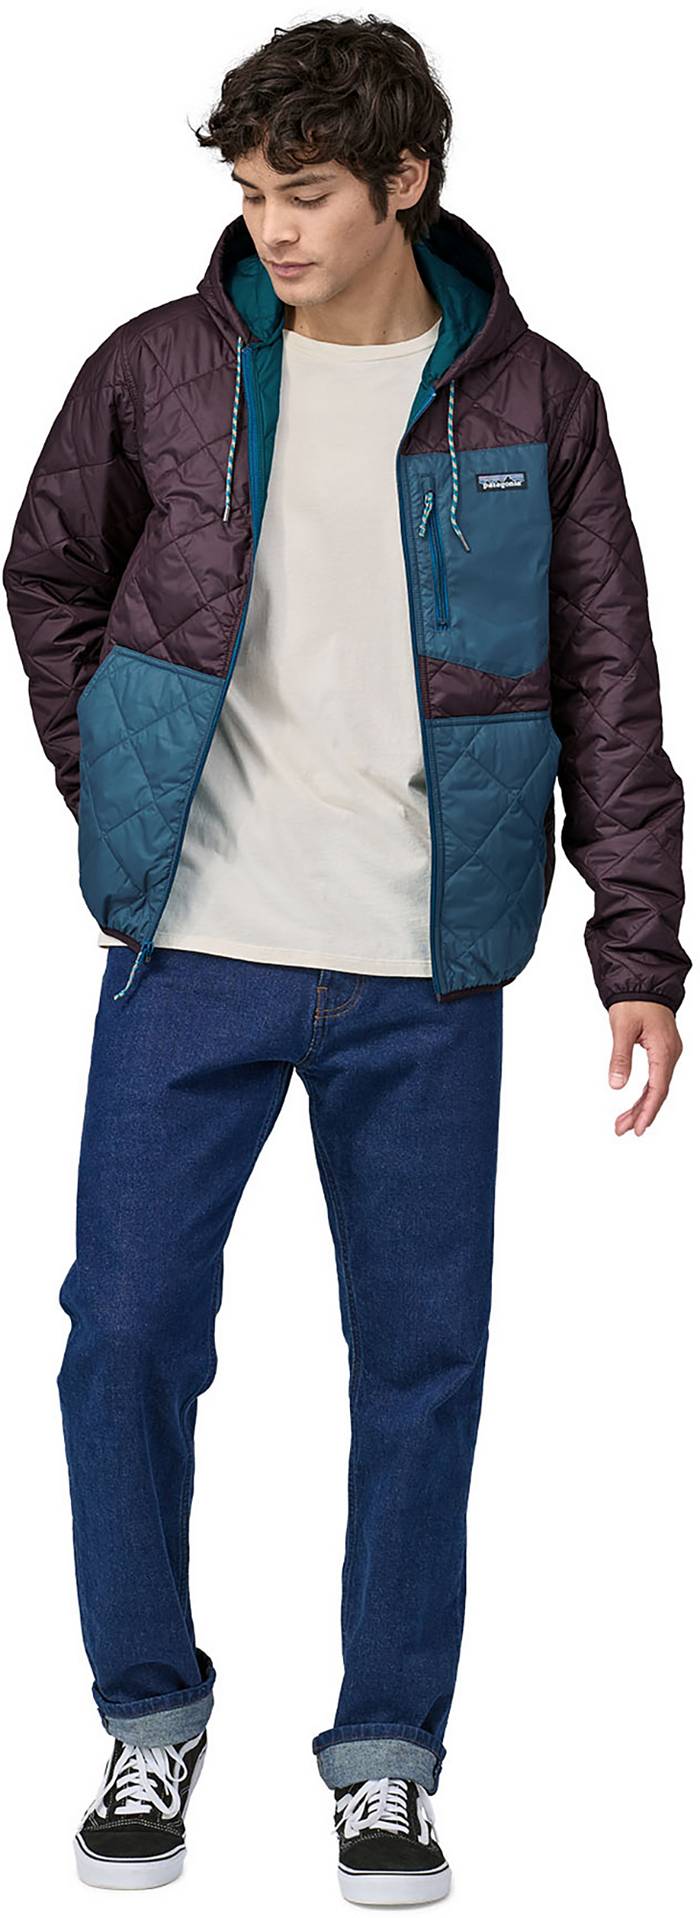 Get 30% Off Patagonia's Quilted Bomber Hoody